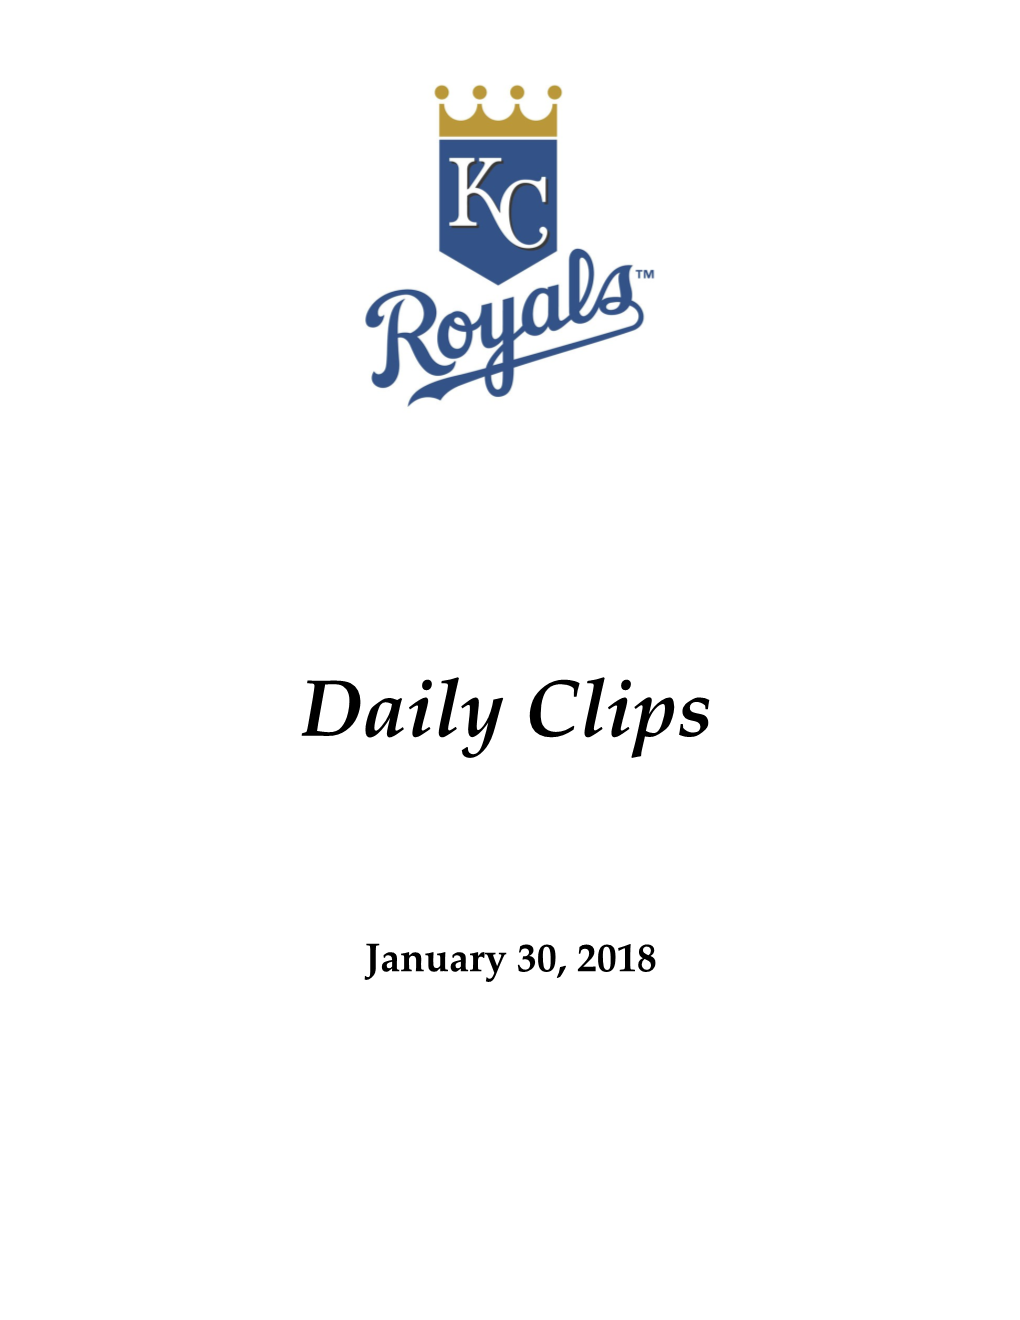 Royals Acquire Hahn, Prospect in Trade with A's